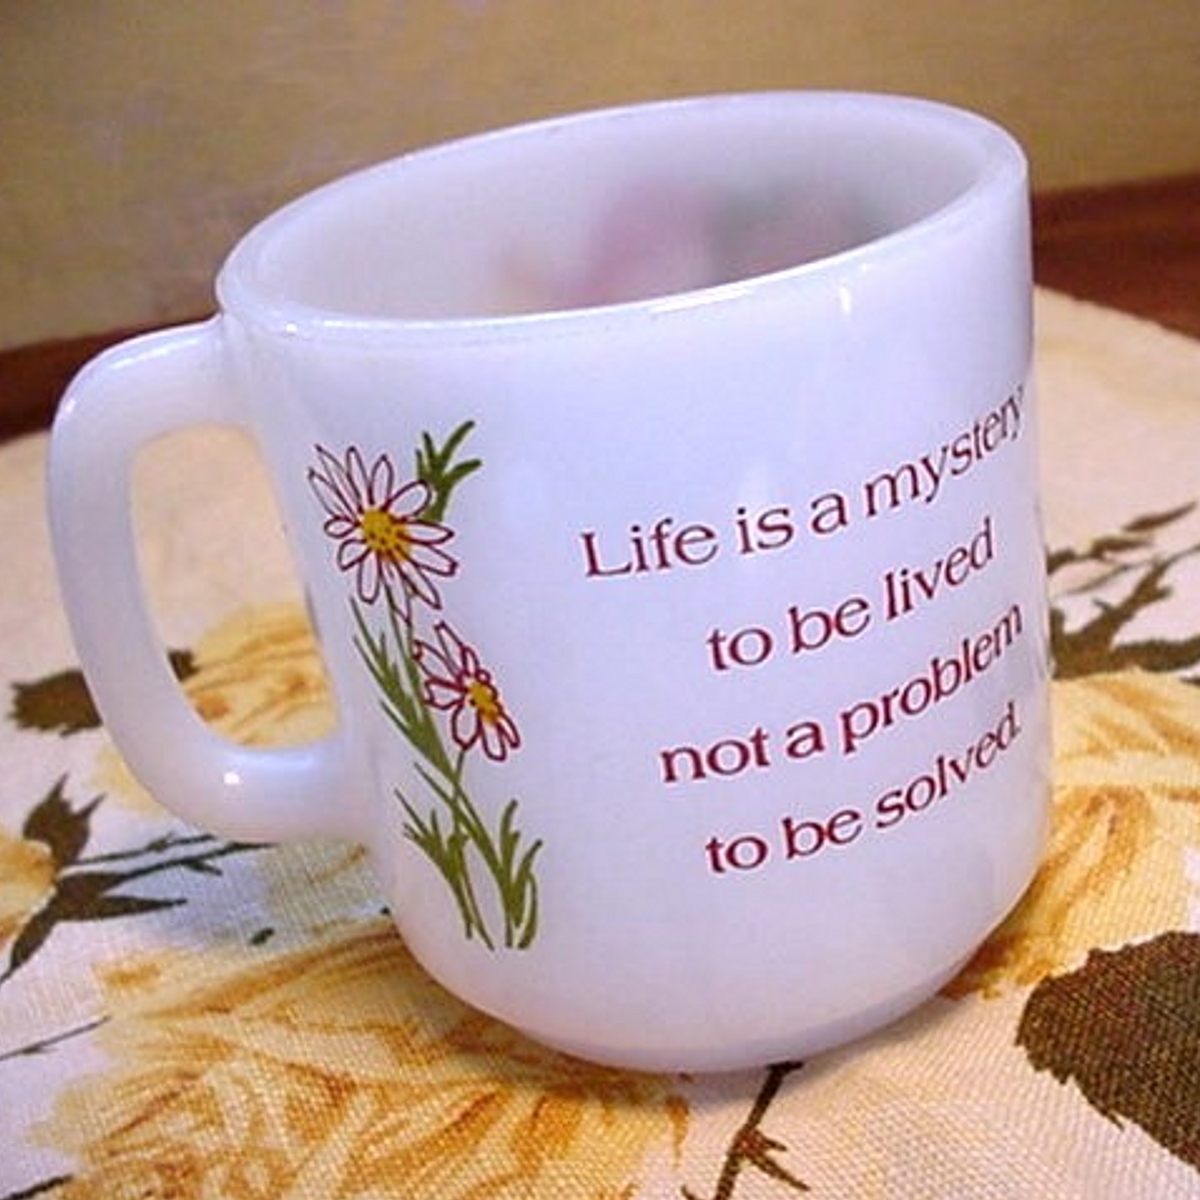 mug with life is a mystery on it